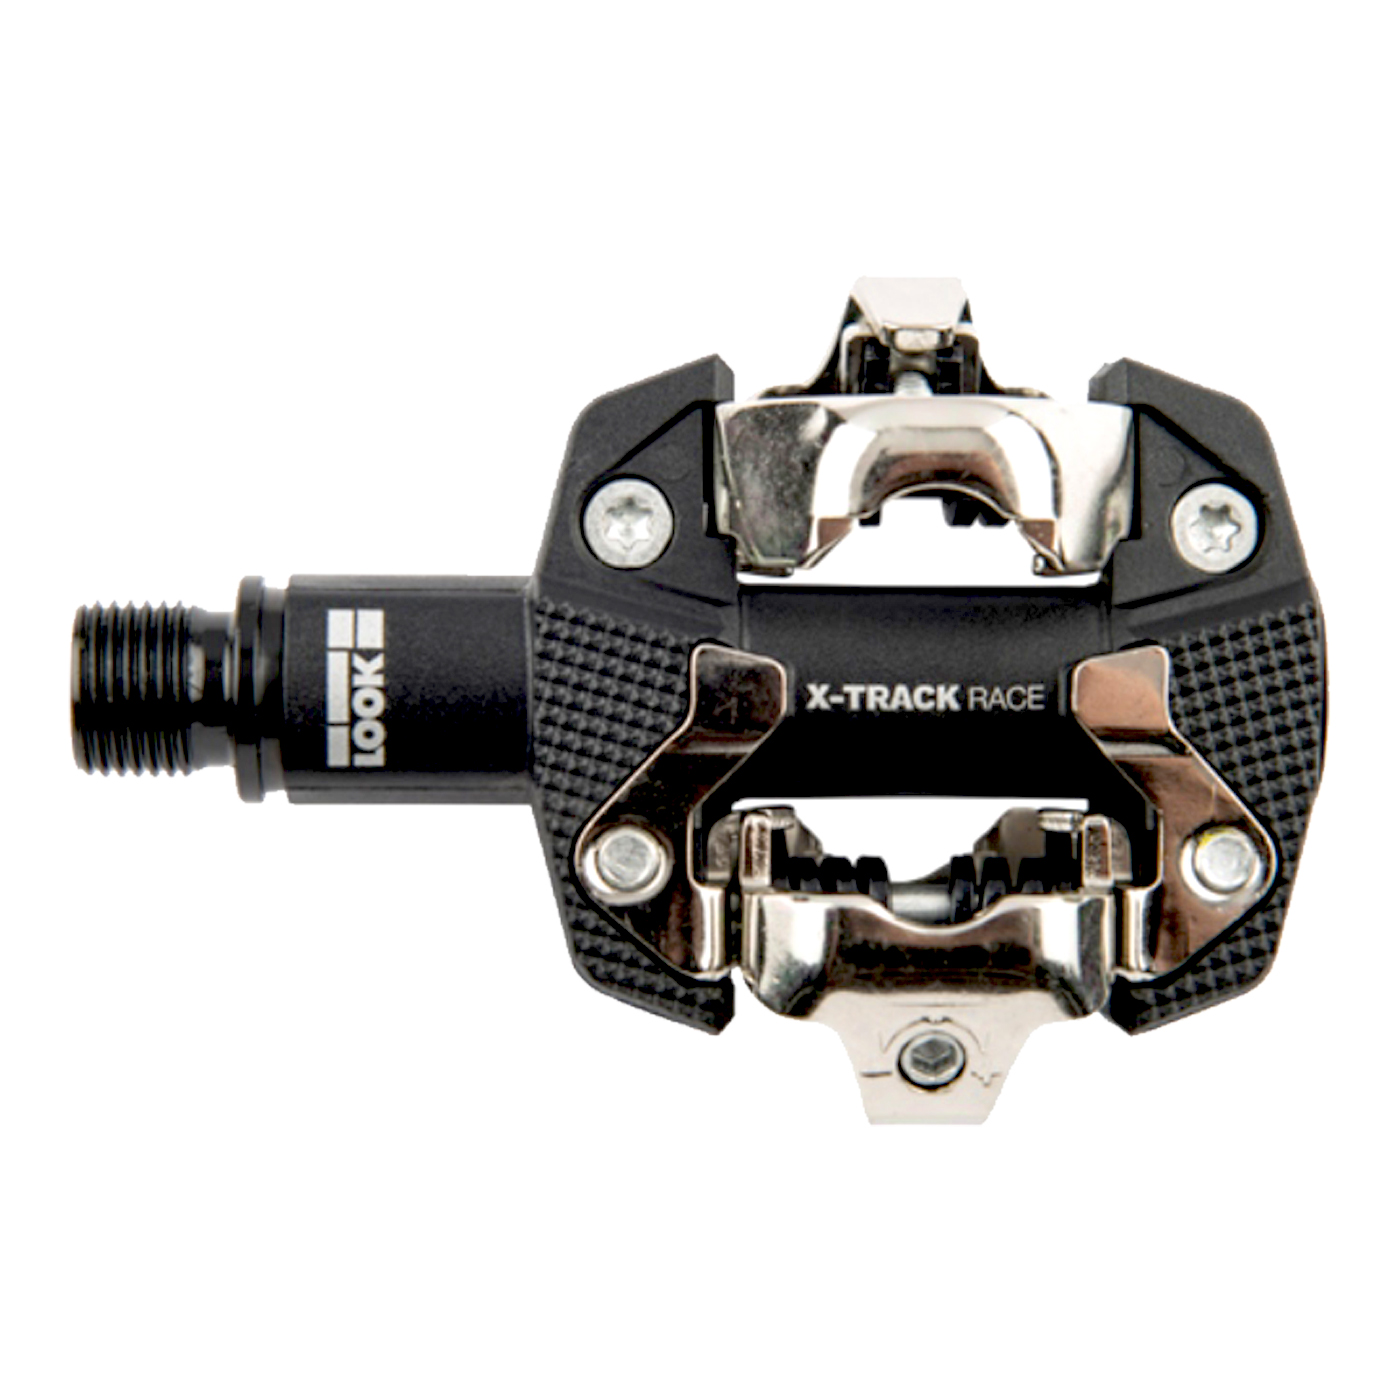 Pedal LOOK MTB X-Country X-TRACK RACE Contacto SPD Composite/CrMo Negro + Placas (00018222)